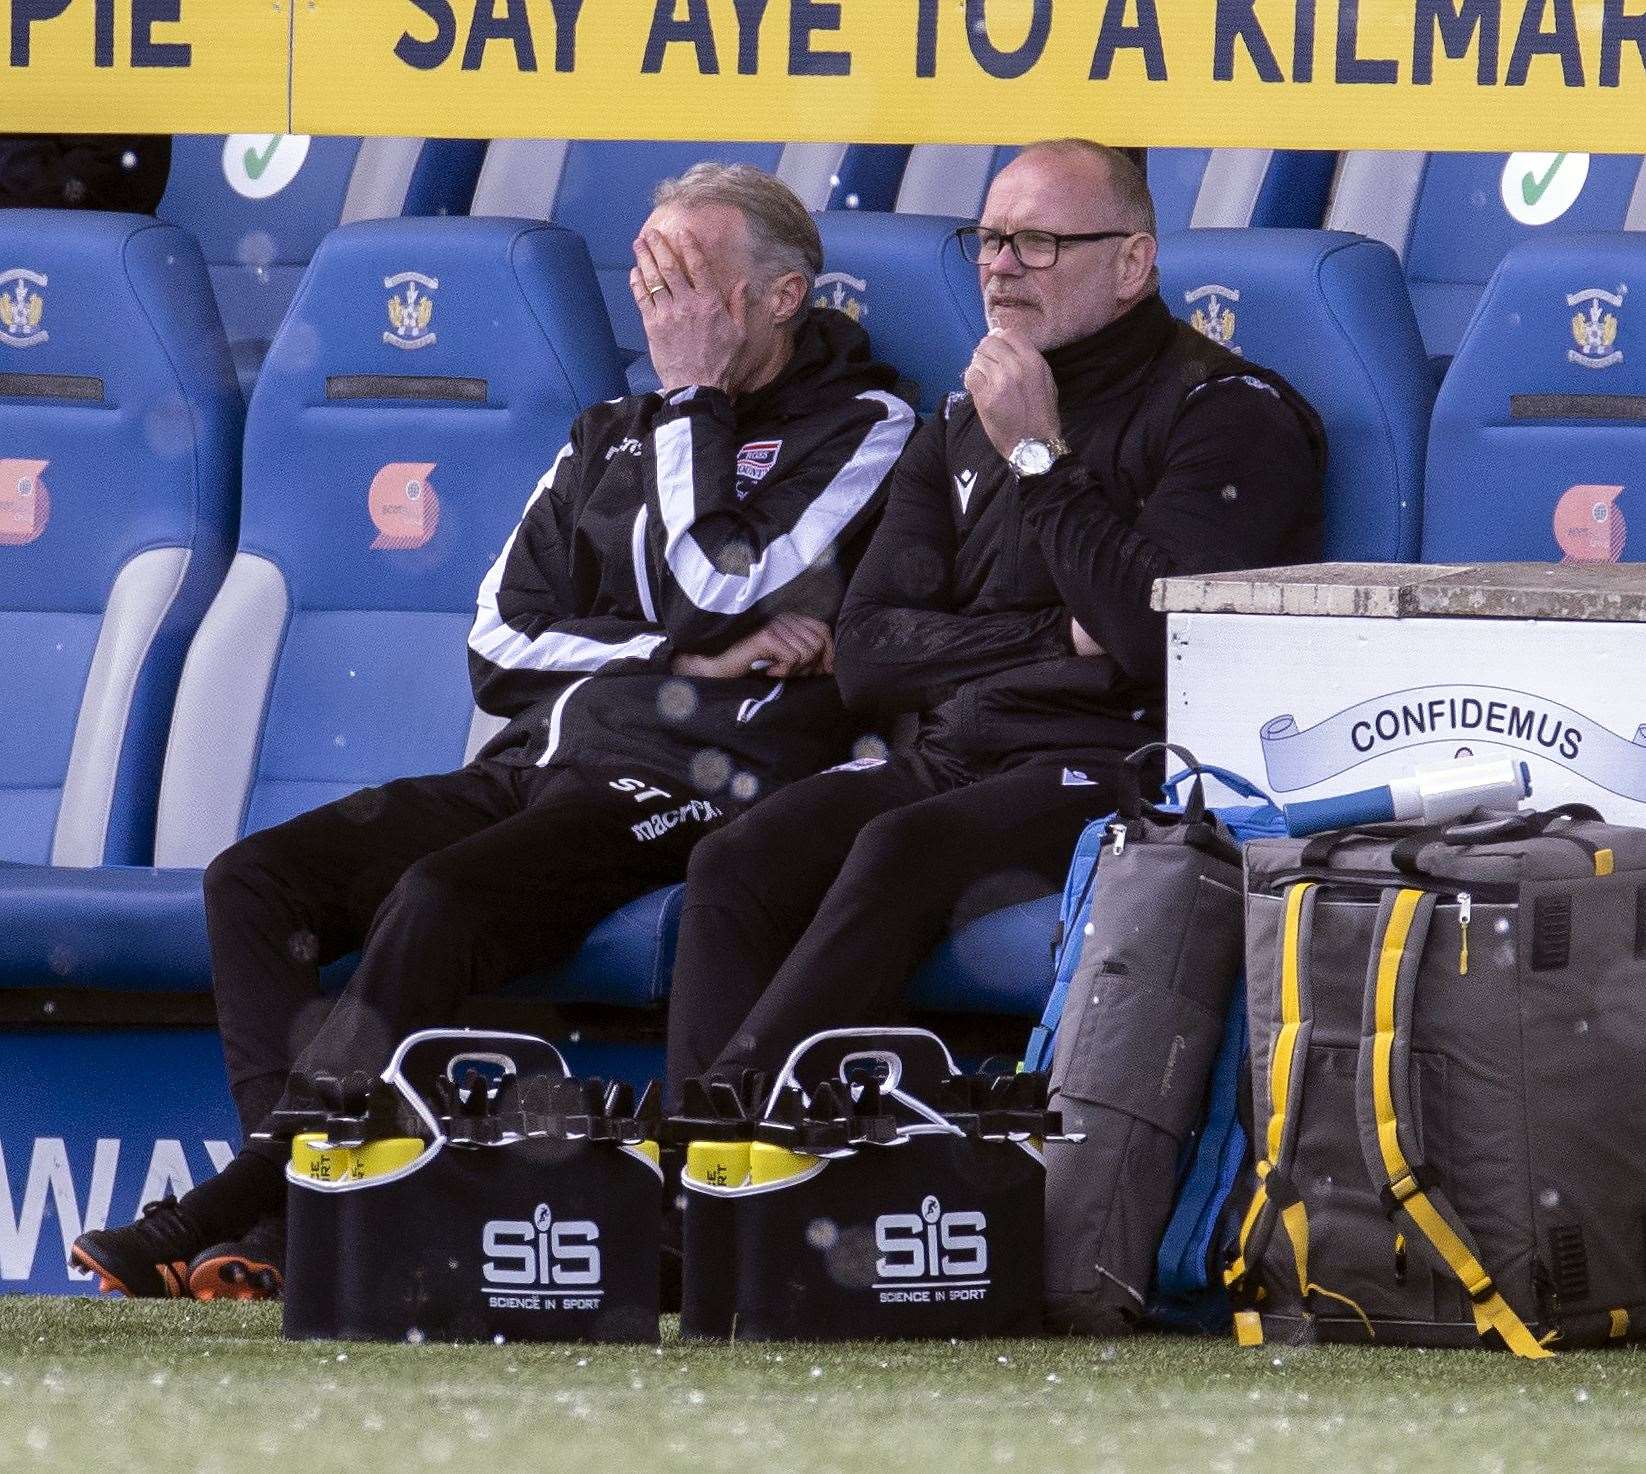 Picture - Ken Macpherson, Inverness. Kilmarnock(2) v Ross County(2). 10.04.21. Ross County manager John Hughes and goalkeeping coach Scott Thomson after Ross County's Ross Draper header missed the target to go wide.